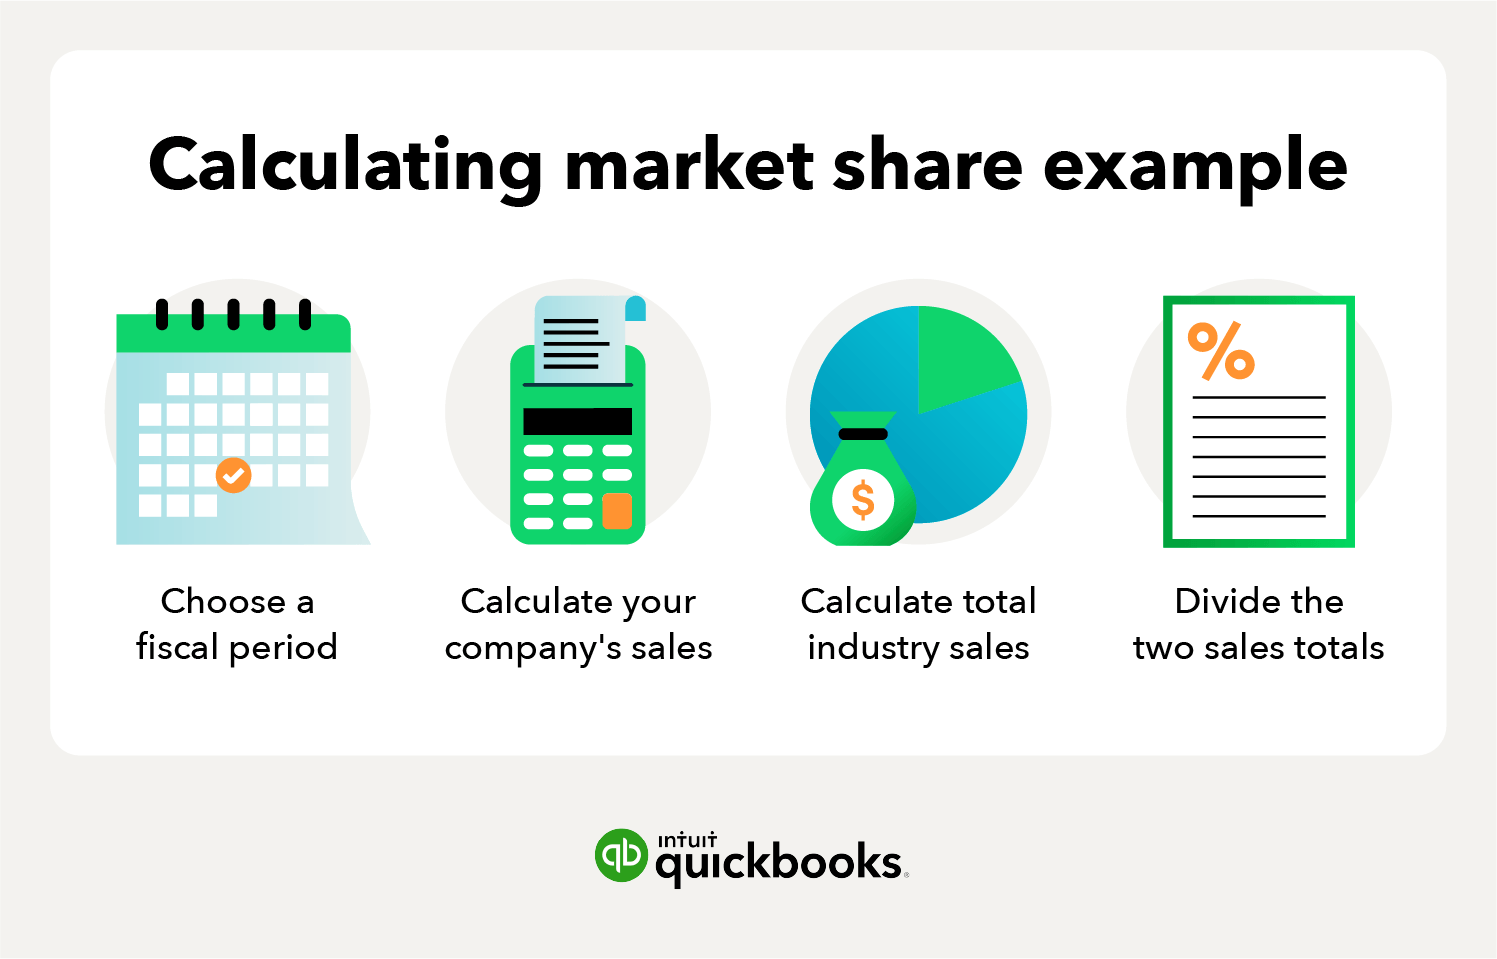 Image depicting the steps to take when calculating market share